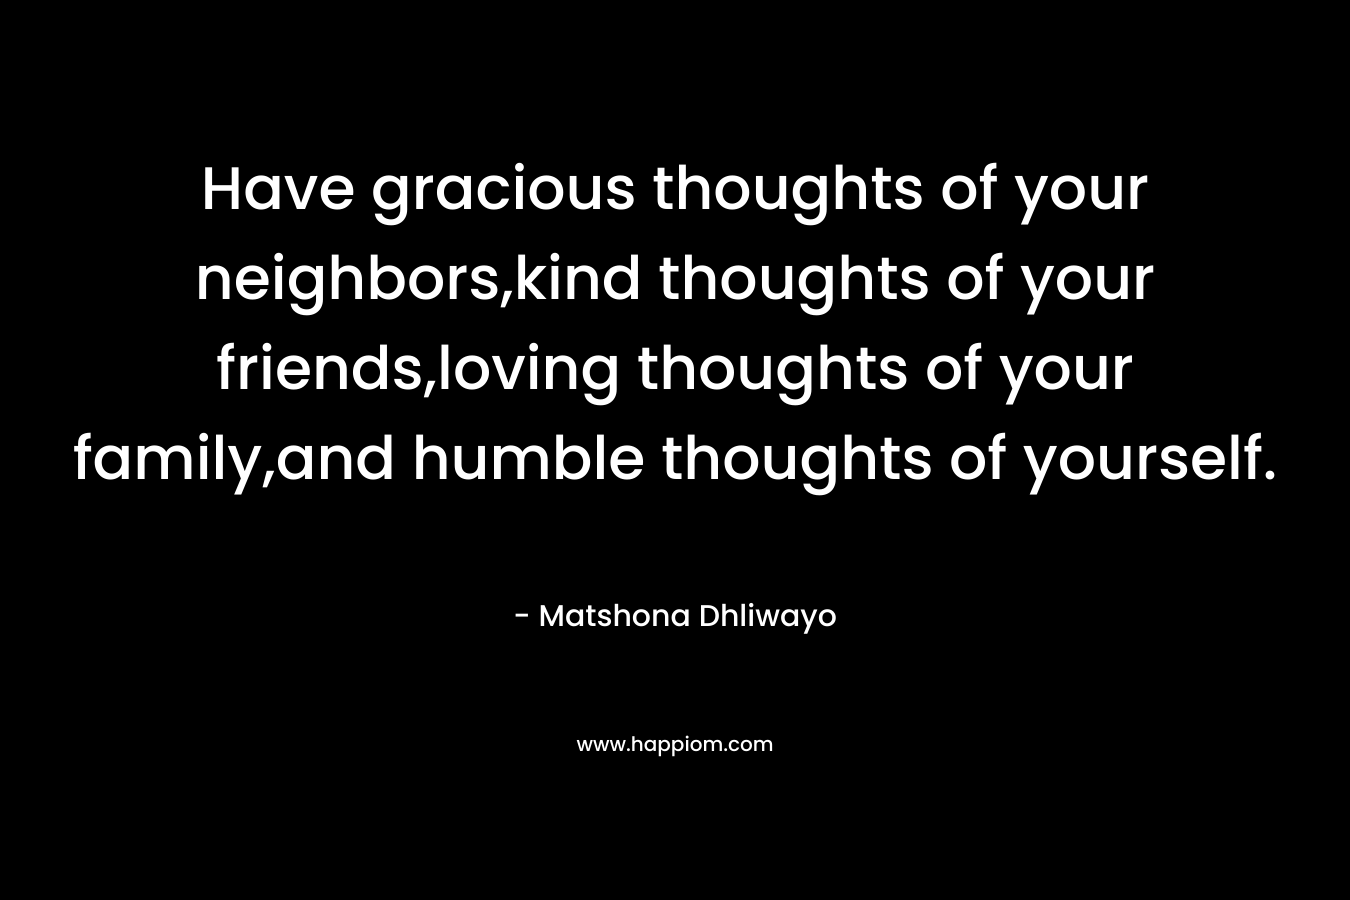 Have gracious thoughts of your neighbors,kind thoughts of your friends,loving thoughts of your family,and humble thoughts of yourself.